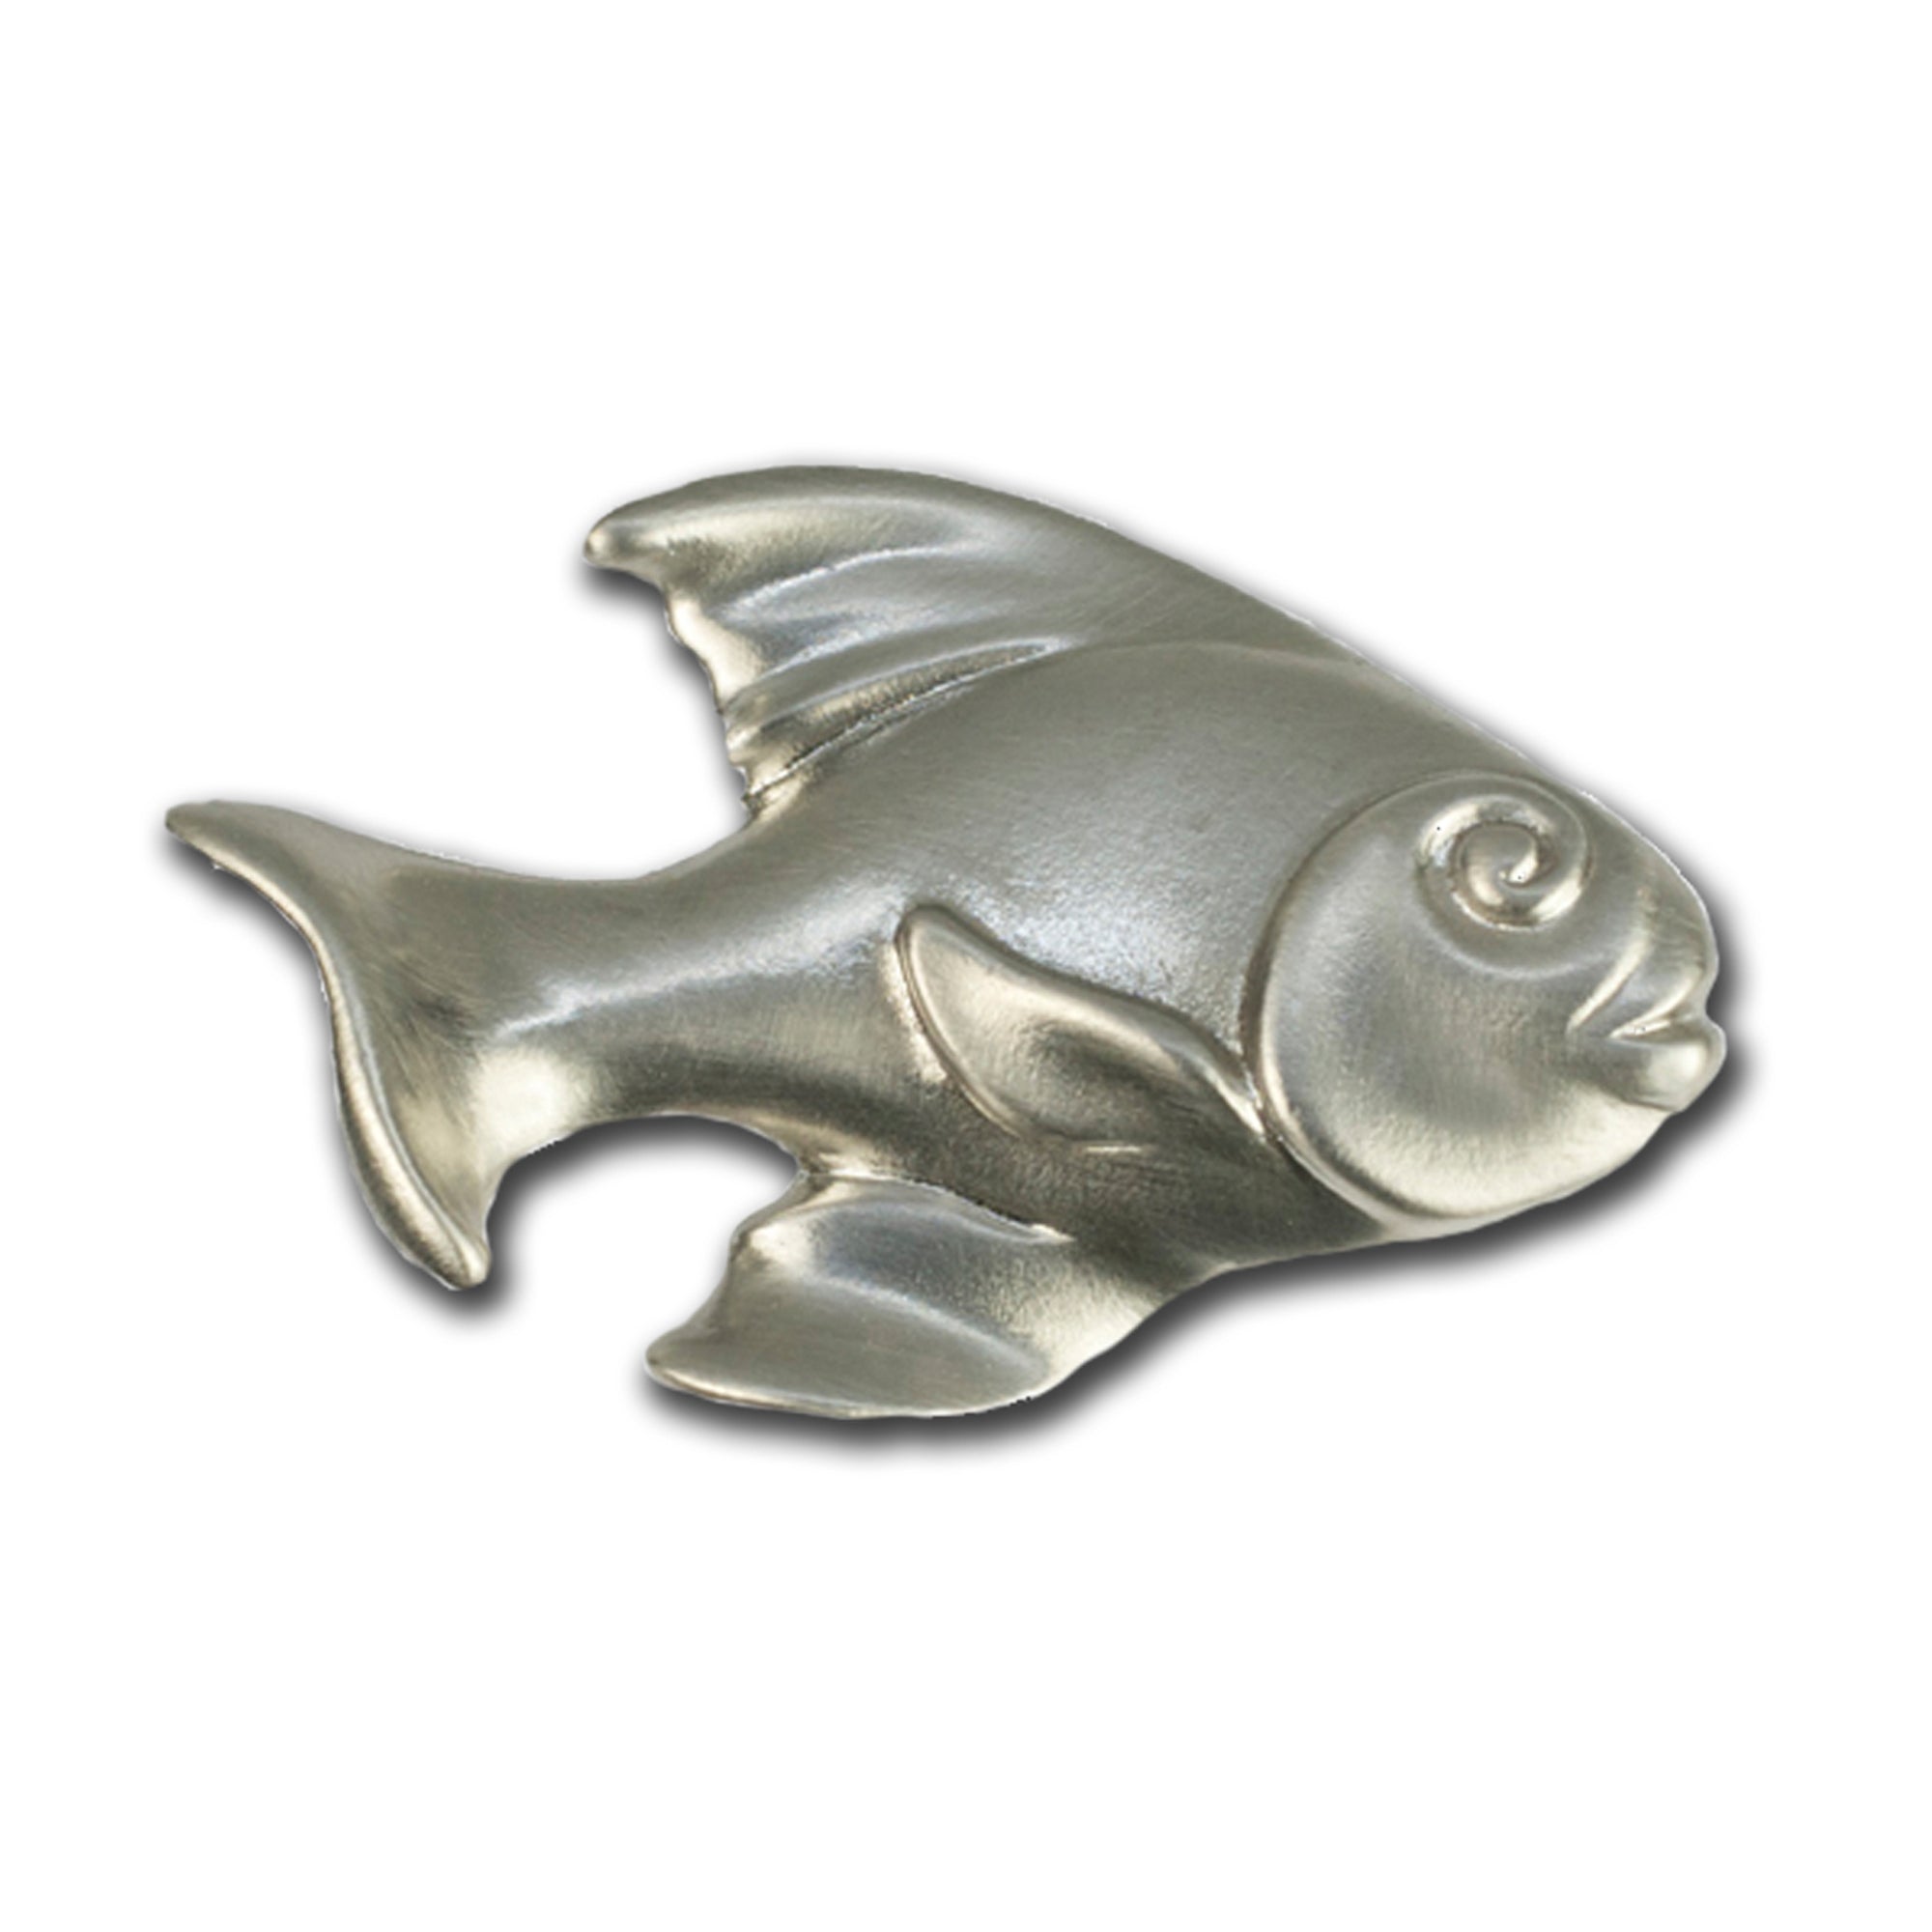 Fish Drawer Pull and Knobs- Fish Handles, Ocean Theme Drawer Pulls and Knobs, Coastal Drawer Pulls, Nautical Drawer Pulls, Sea Life Cabinet Pull, Size